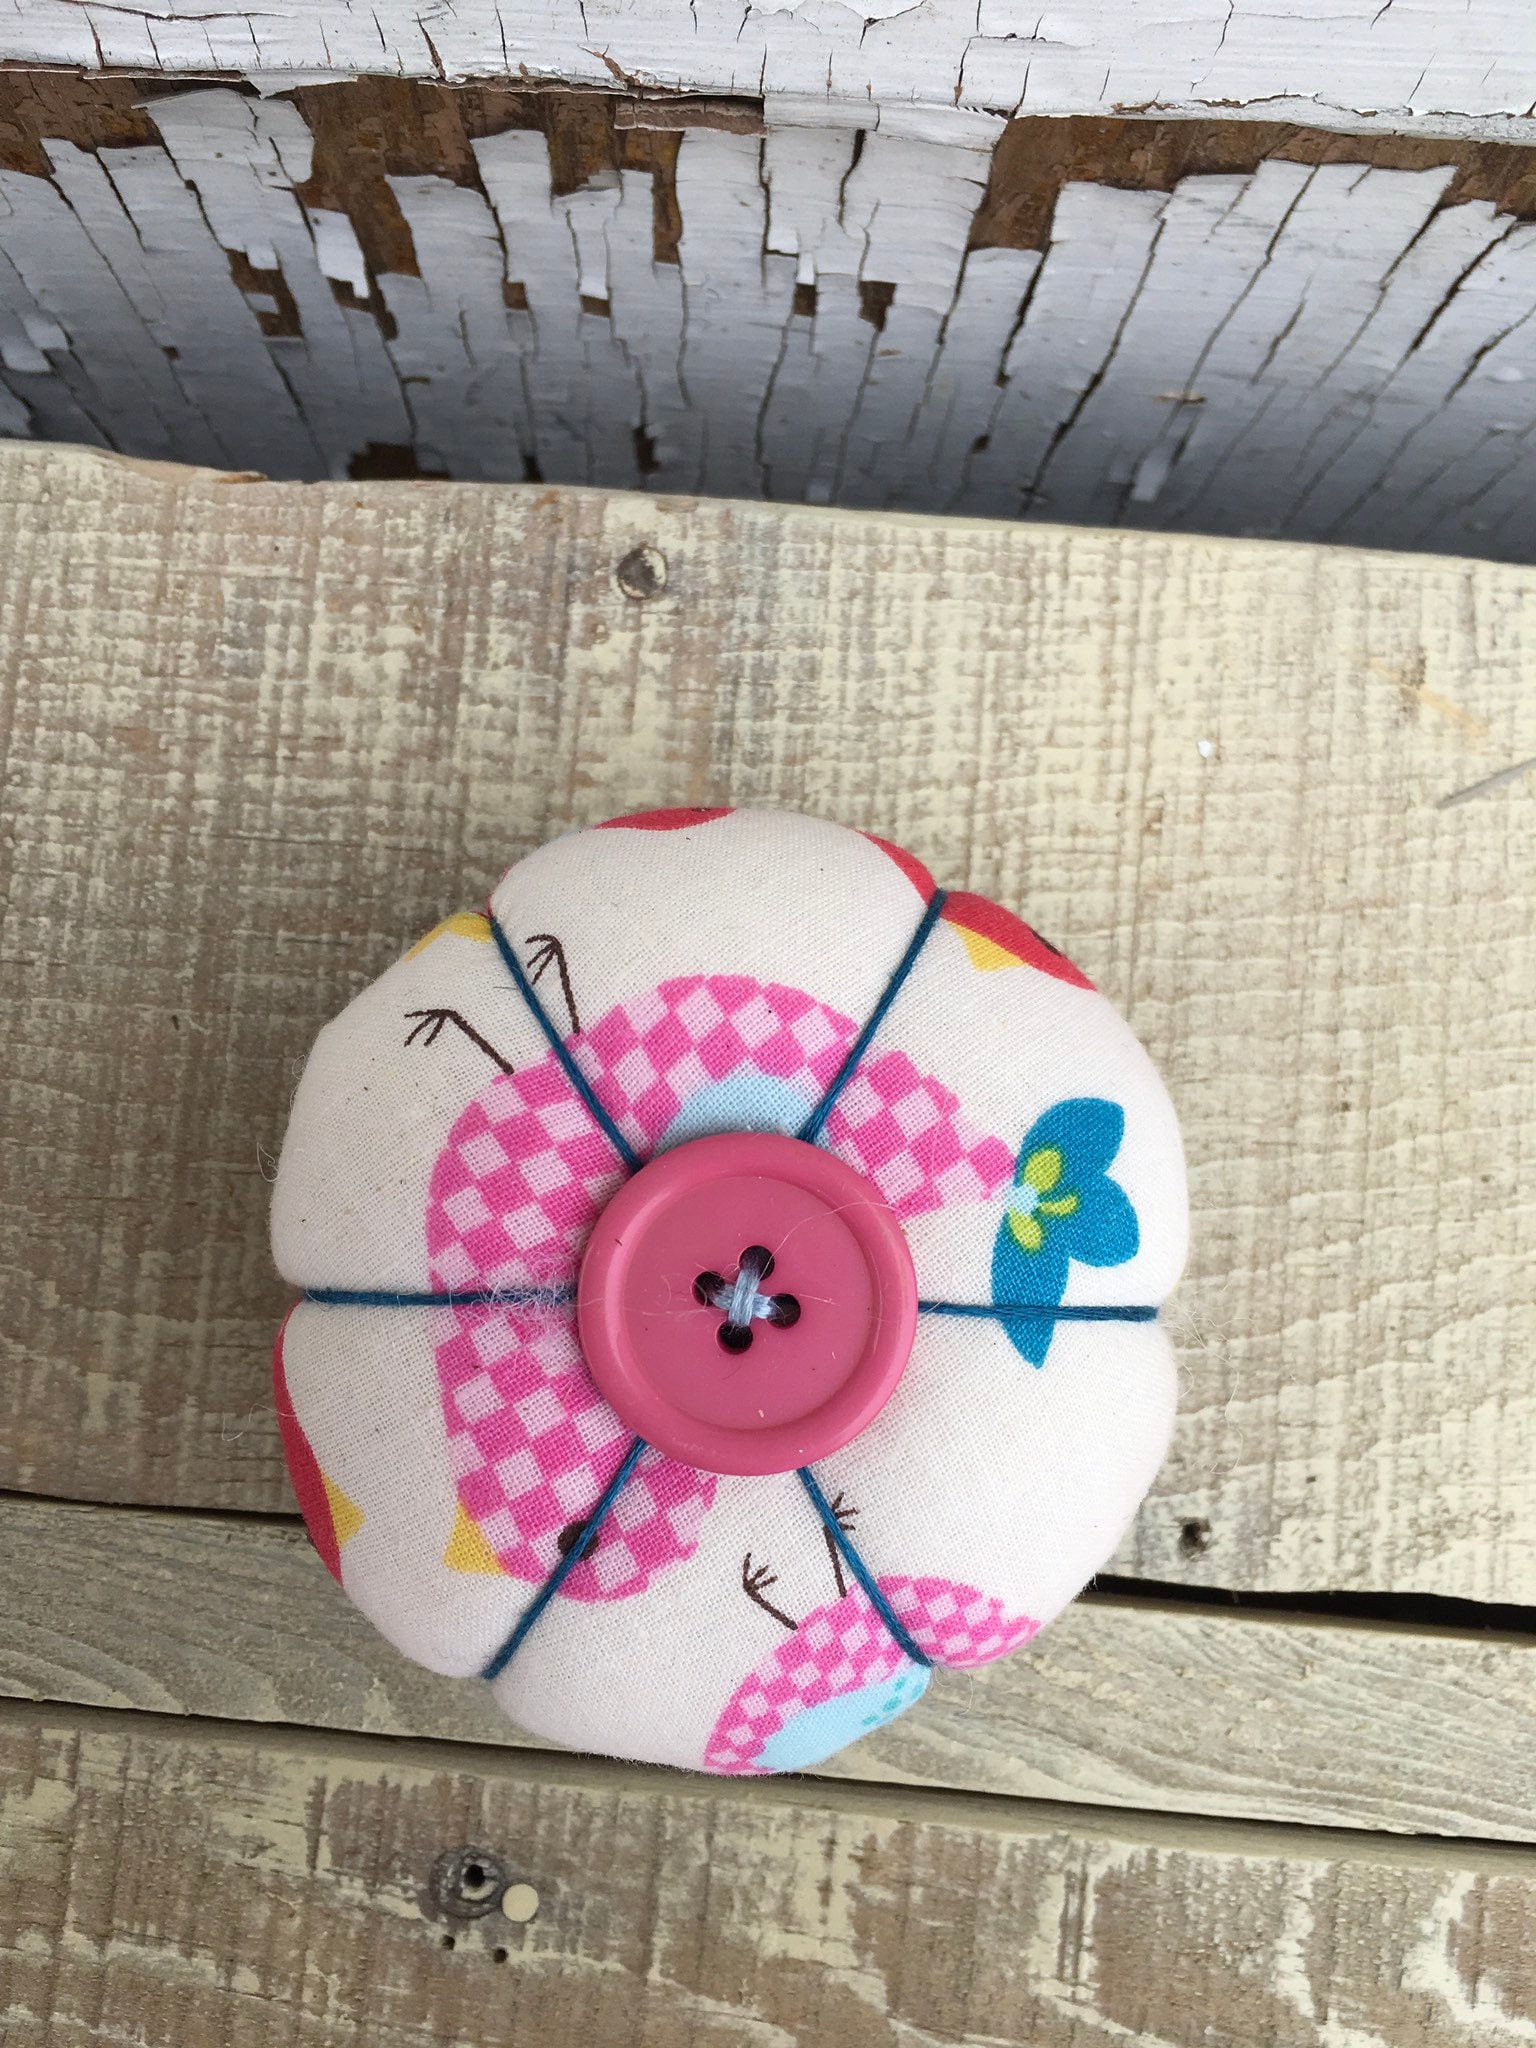 Primitive pin Cushion in Old Canning Lid